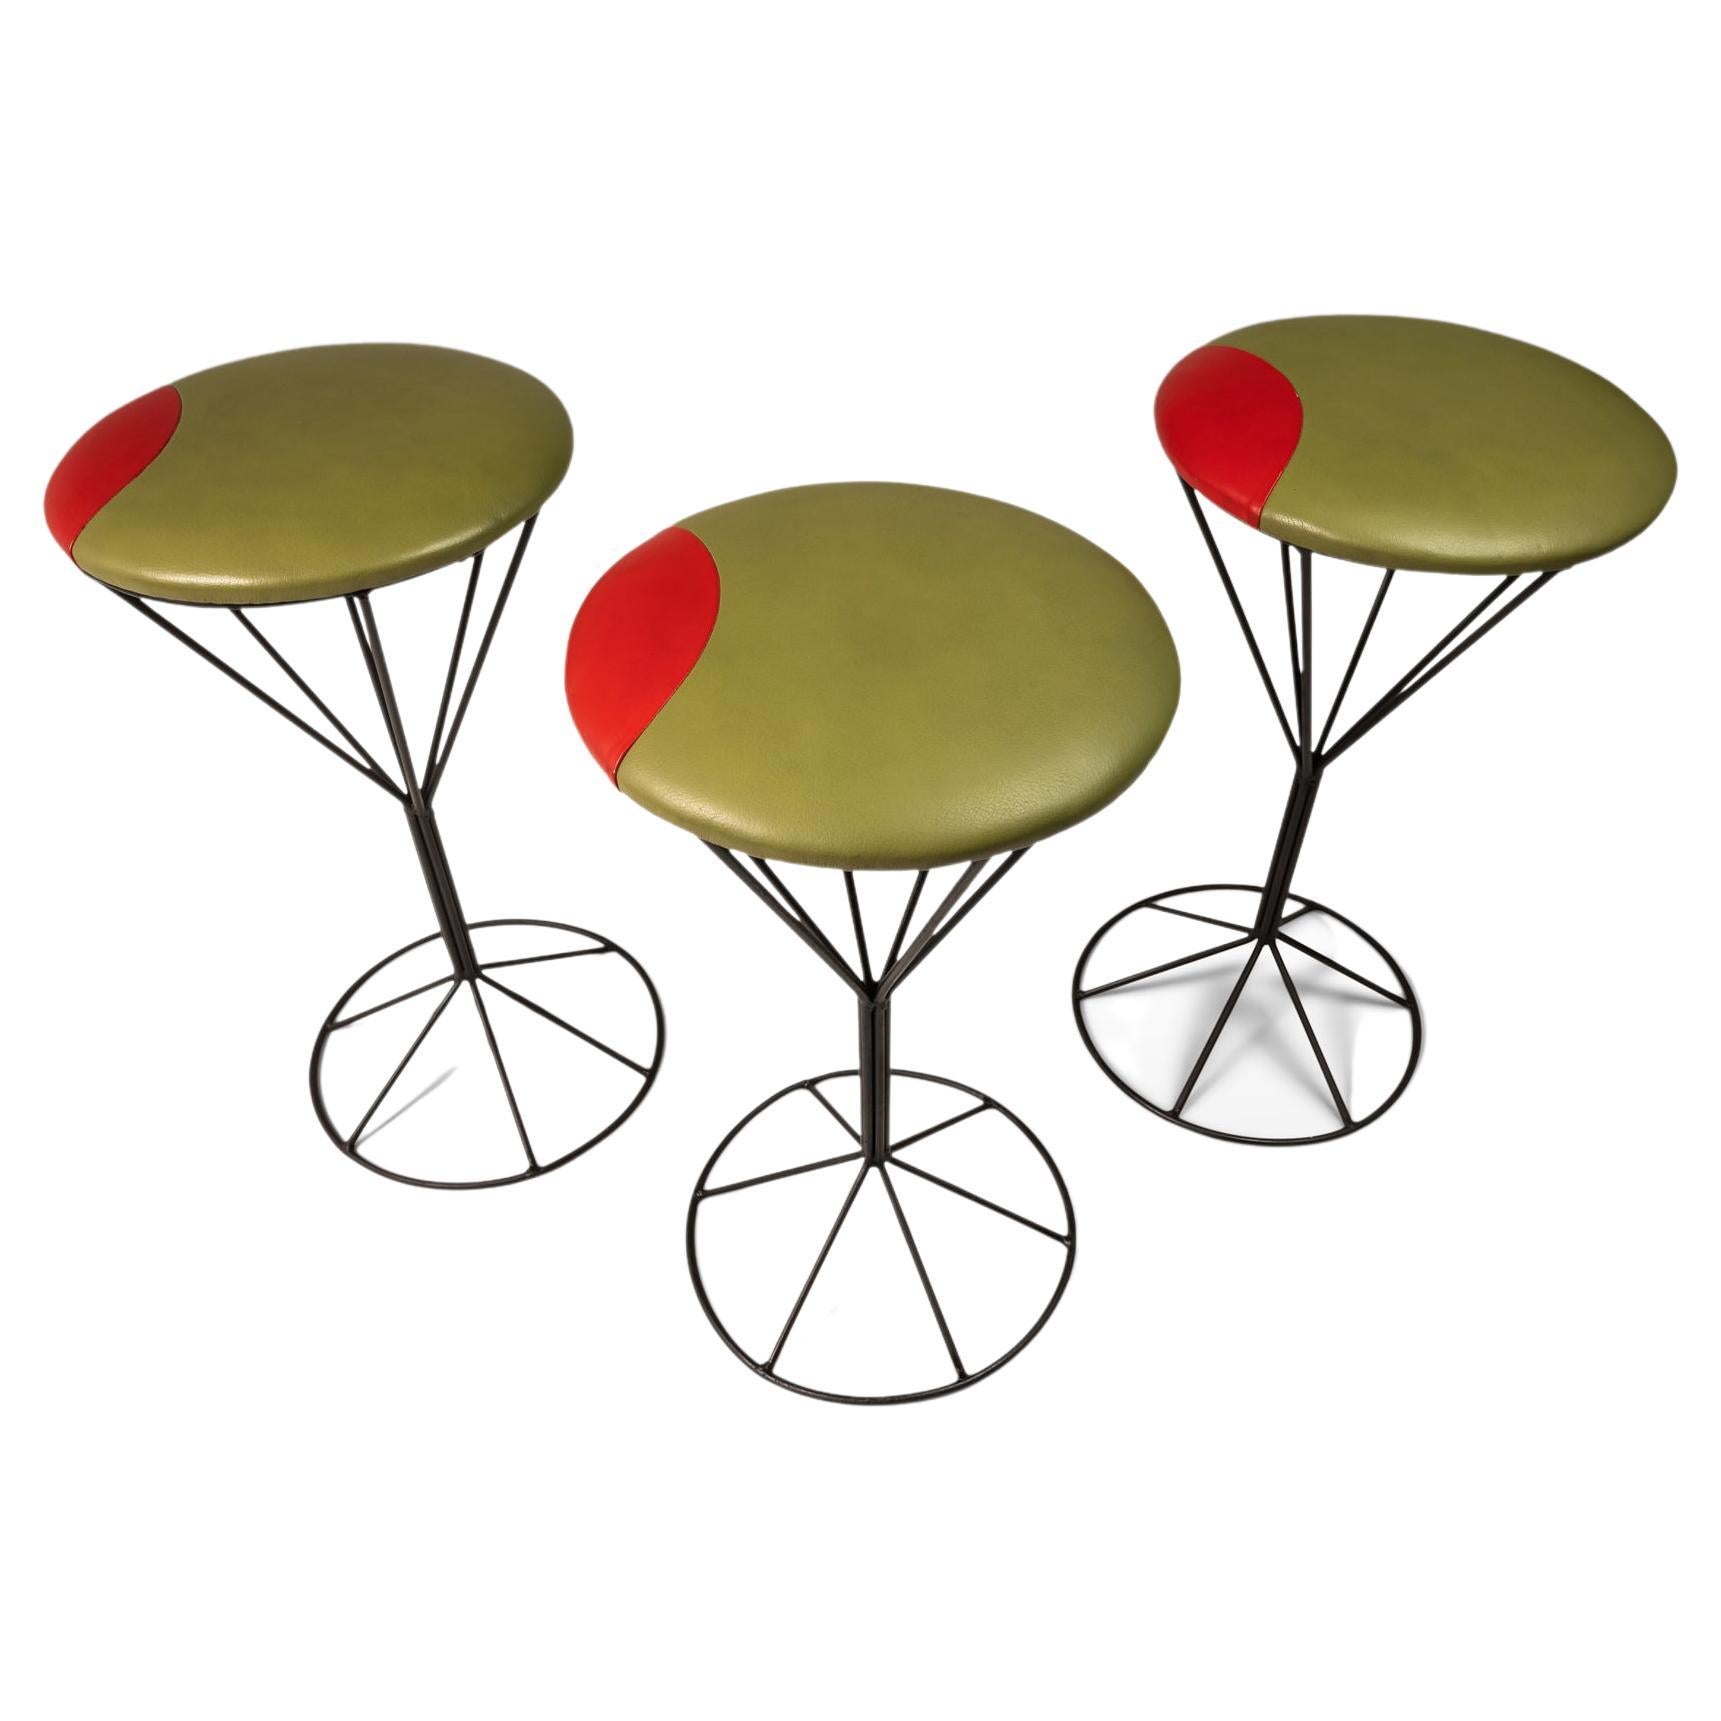 Set of Three ( 3 ) Martini Barstools in Wrought Iron in the Manner of Tony Paul For Sale